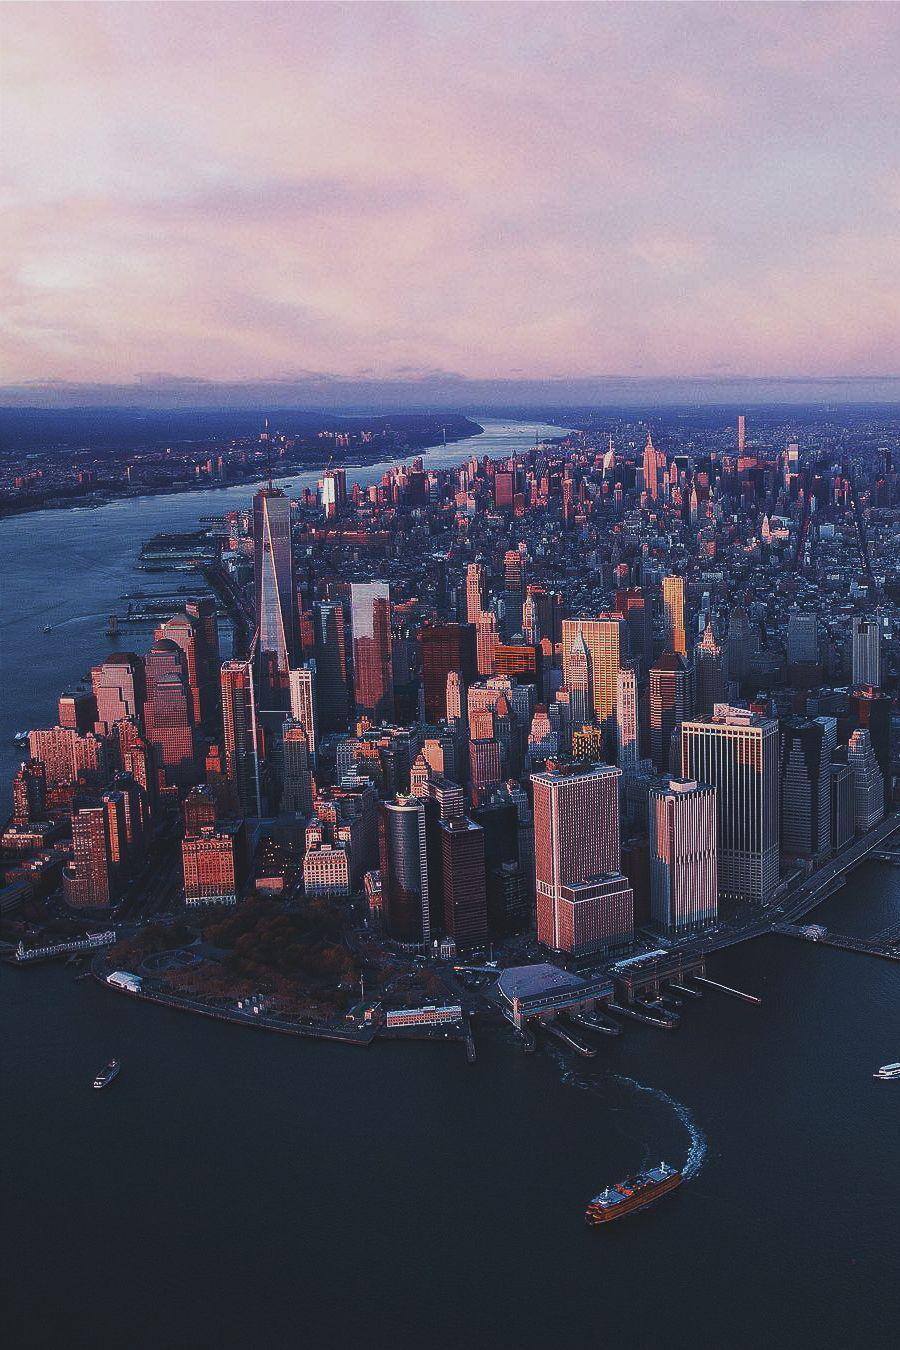 Sunrise in NYC by seandshoots. City wallpaper, Travel, New york